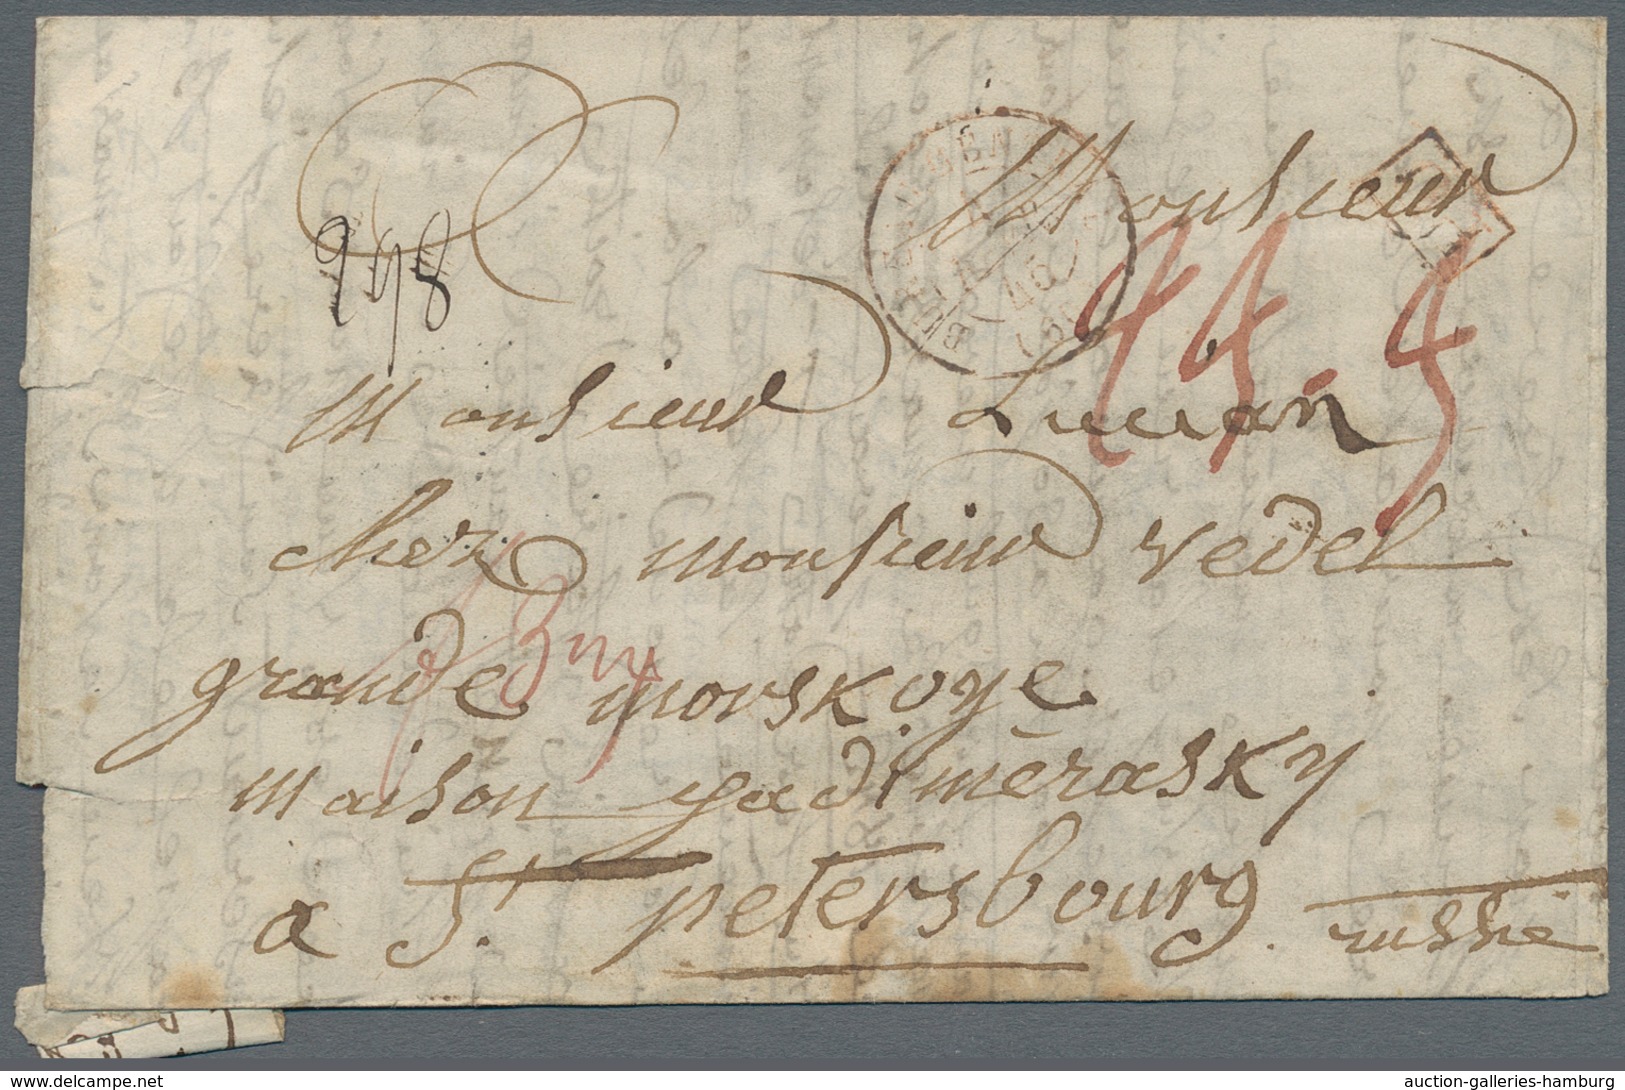 Russland - Vorphilatelie: 1845/56 four covers all sent from/to St. Petersburg with different cancels